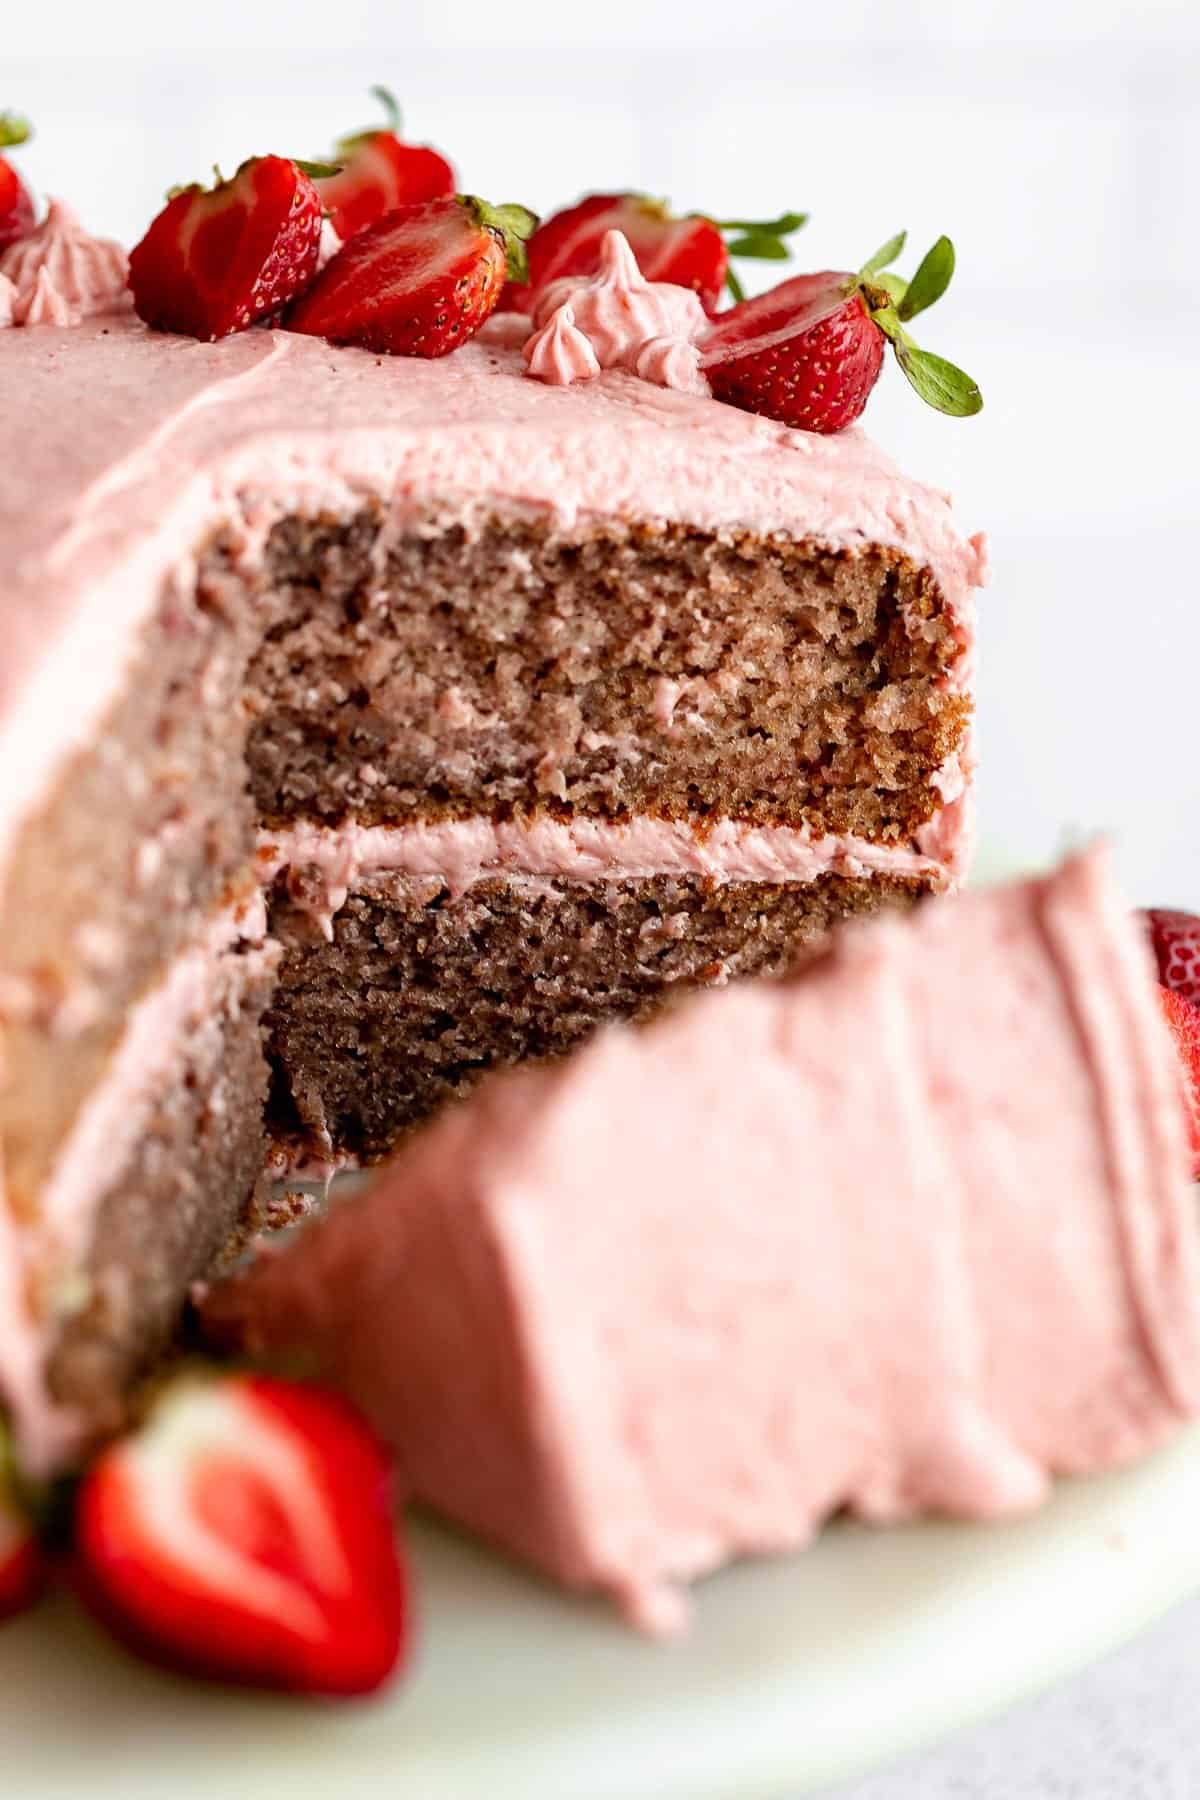 gluten free strawberry cake on a cake stand with fresh strawberries